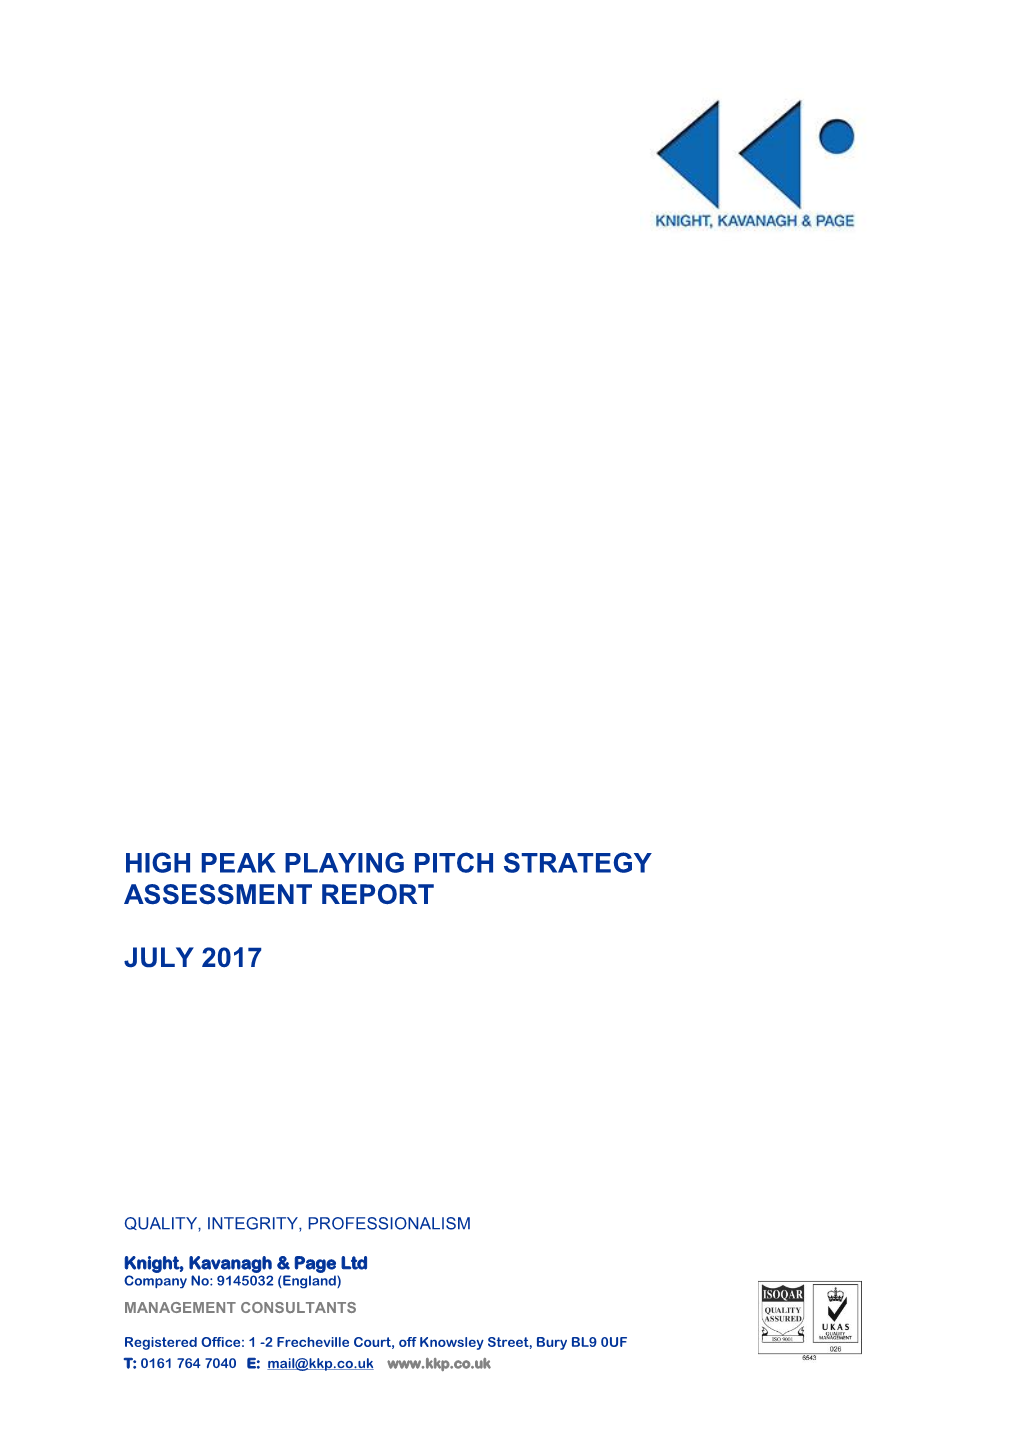 High Peak Playing Pitch Strategy Assessment Report